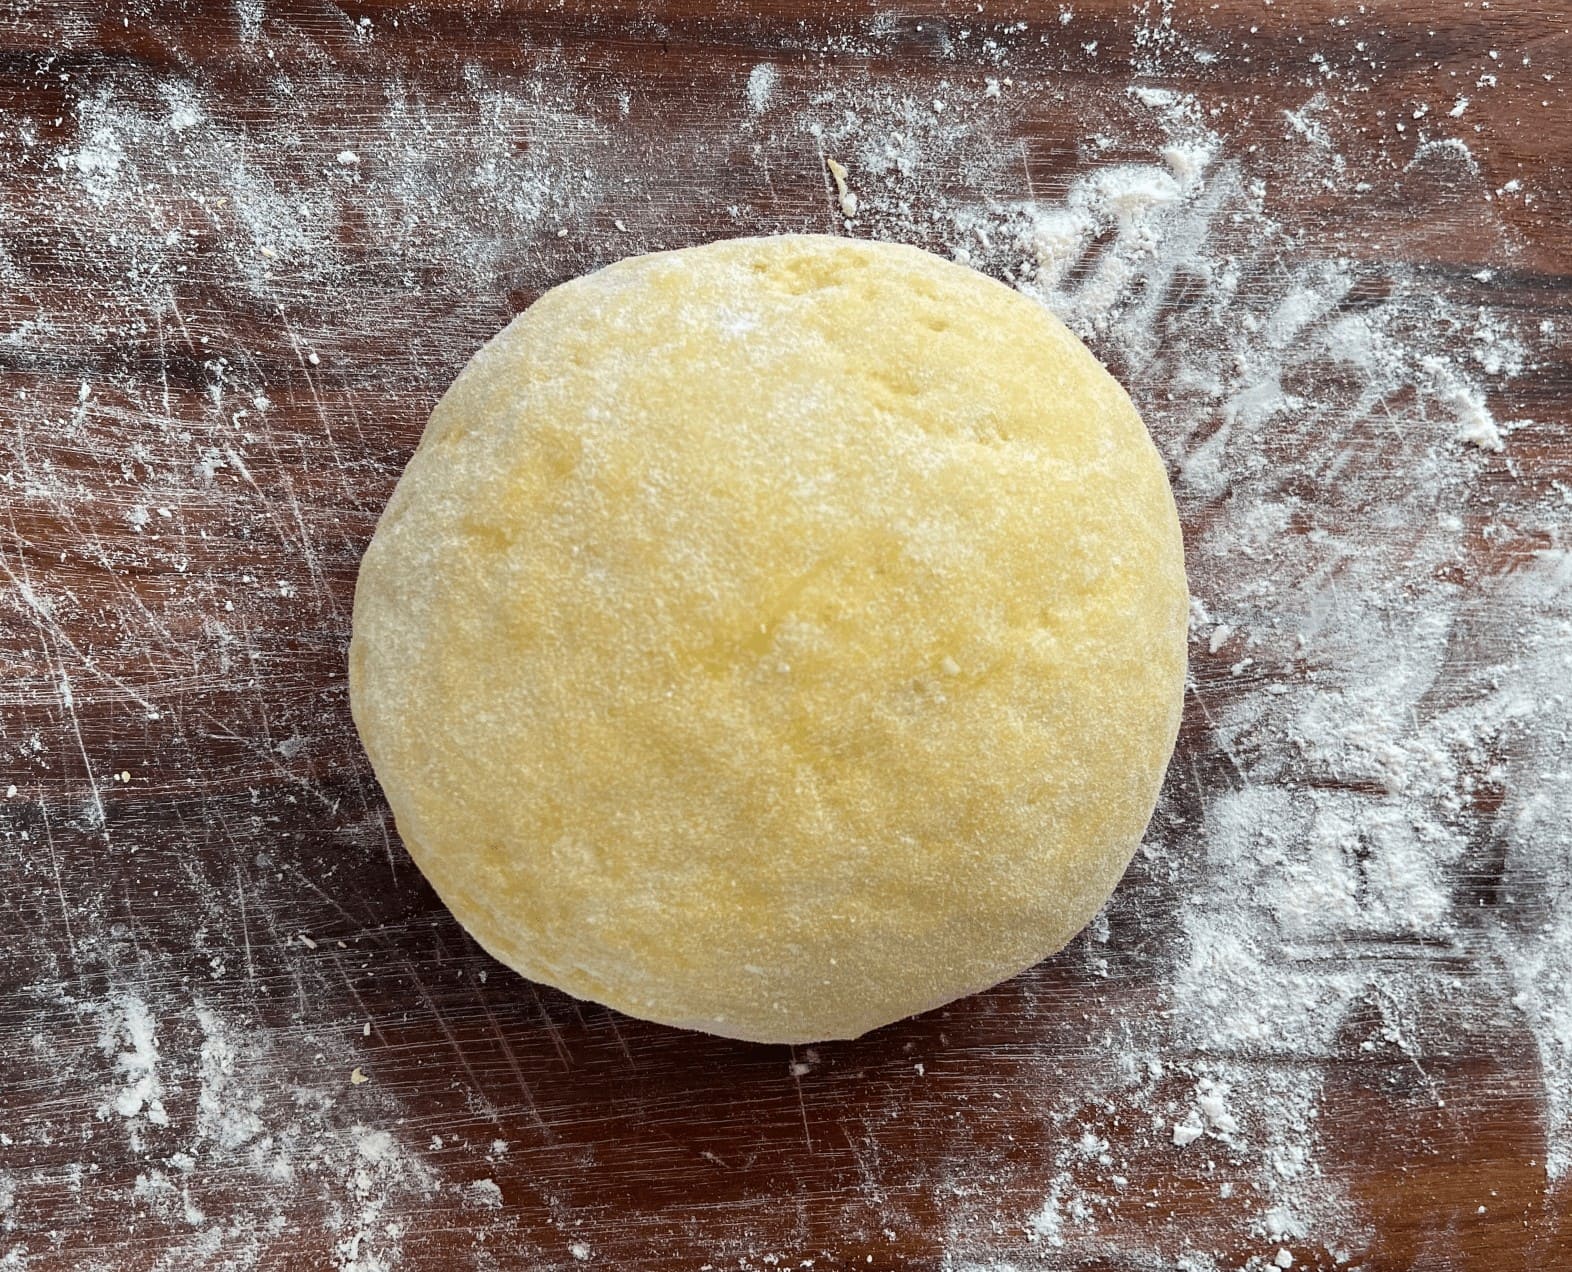 after kneading dough